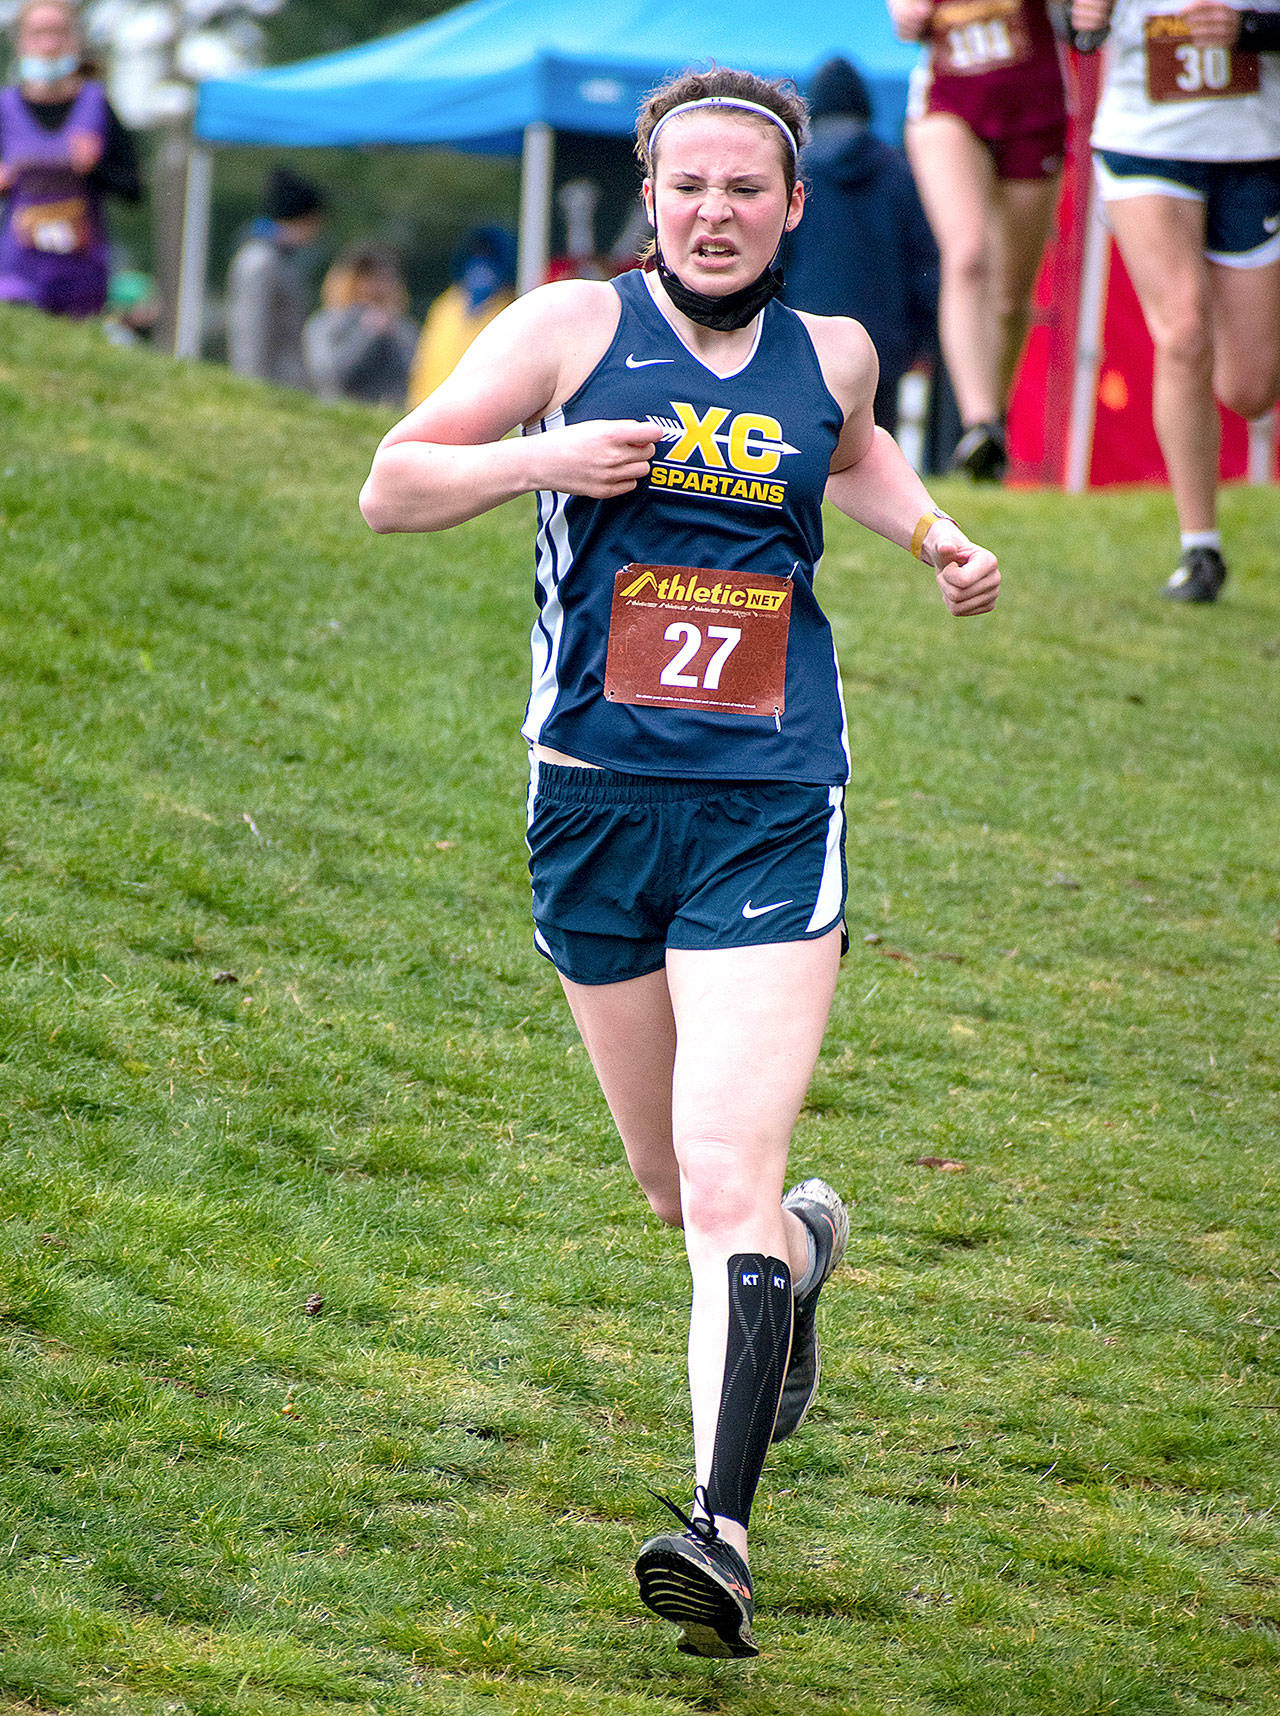 Forks’ Keira Johnson finished fifth in the 2B District 4 cross country meet in Rainier on Saturday. (Photo courtesy of Forks cross country)